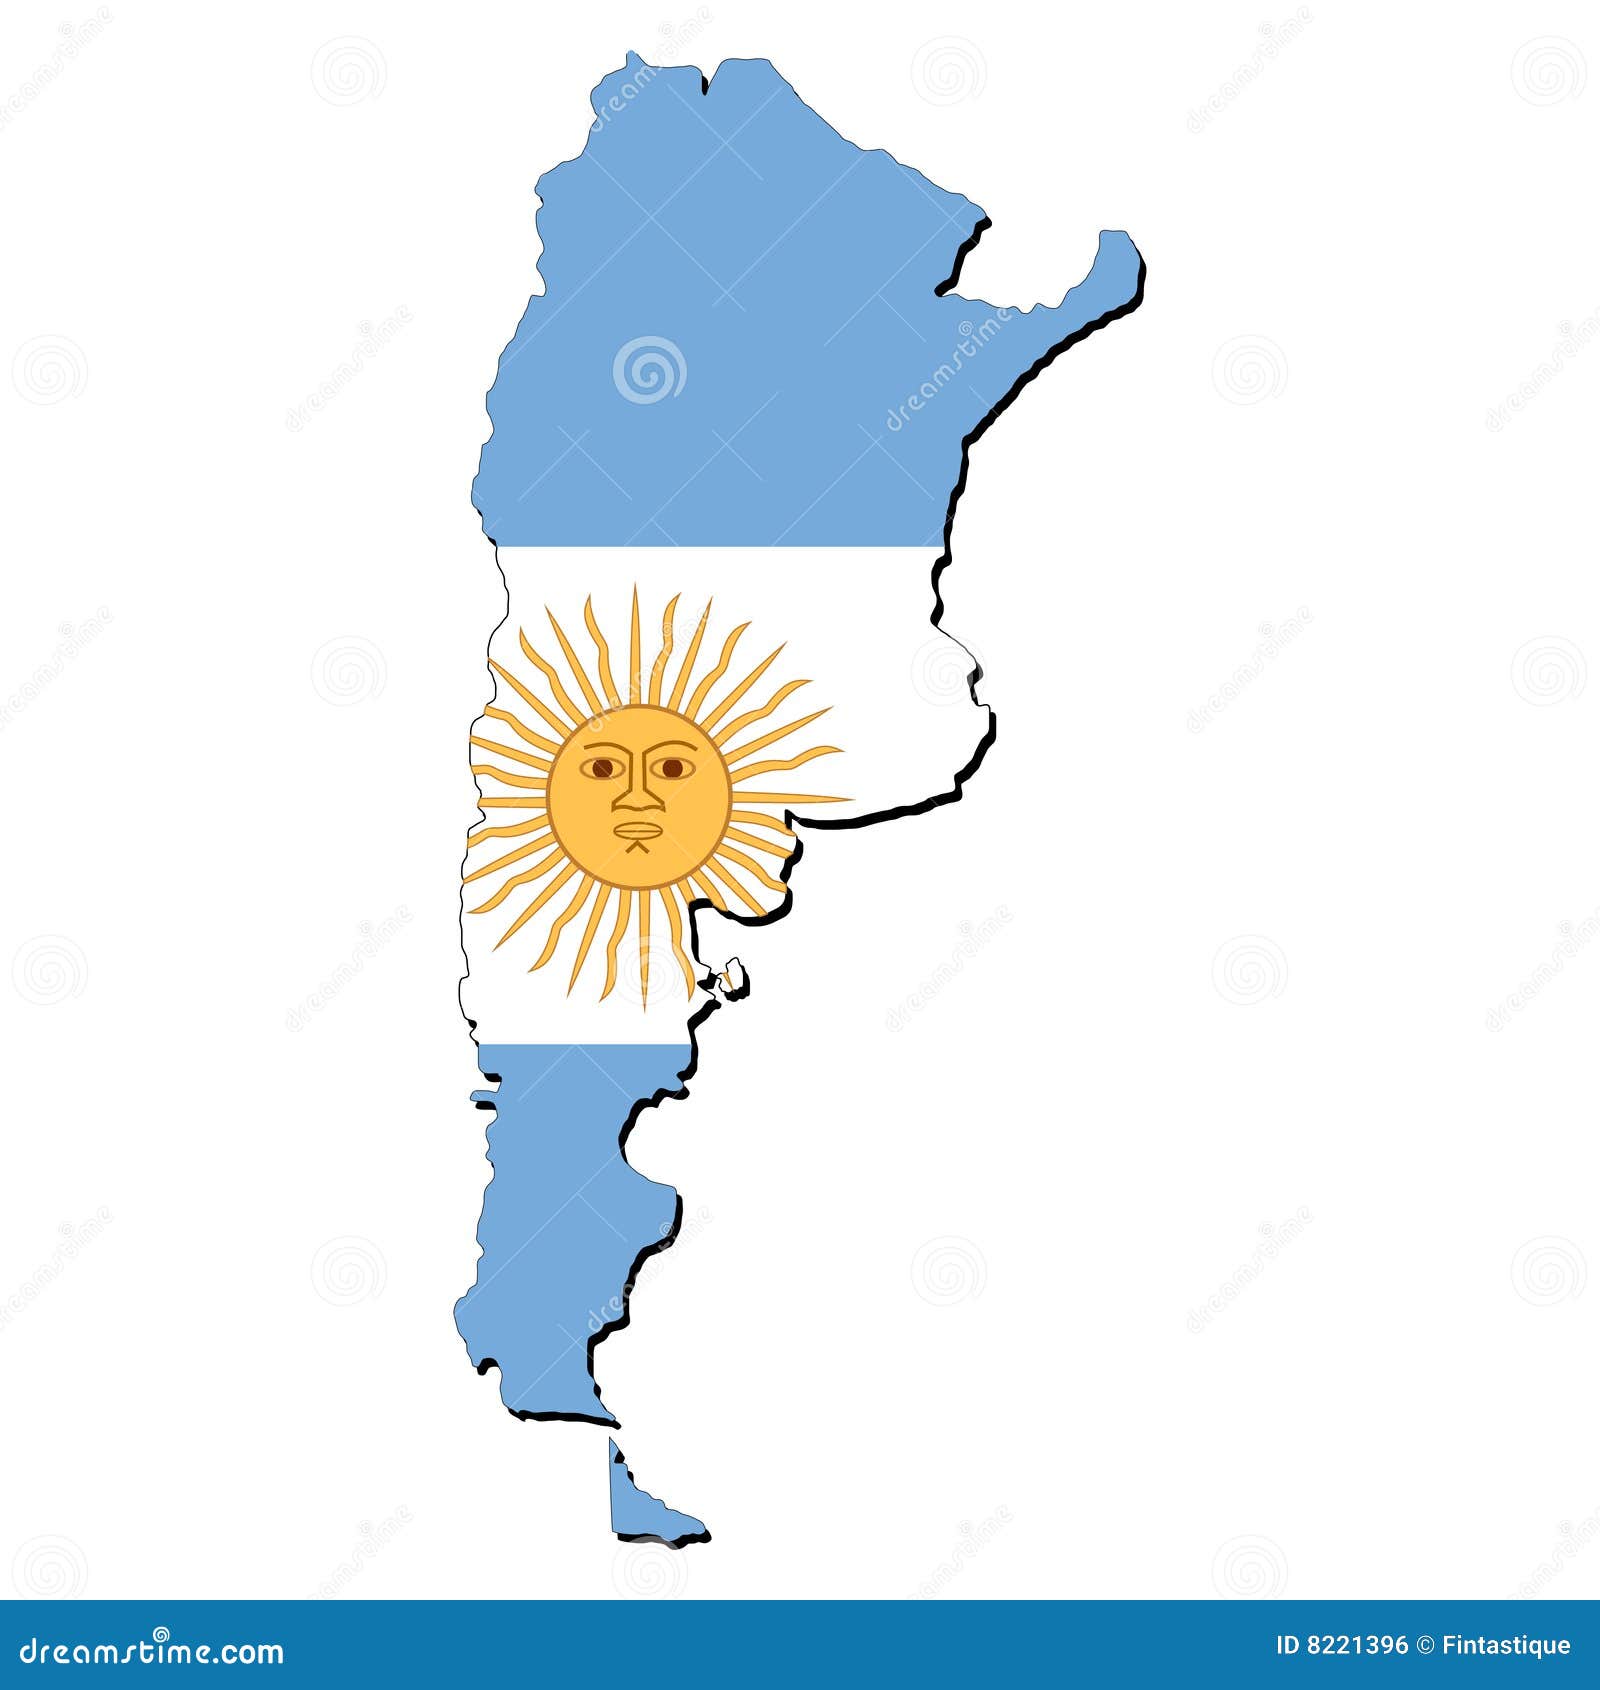 clipart map of argentina - photo #24